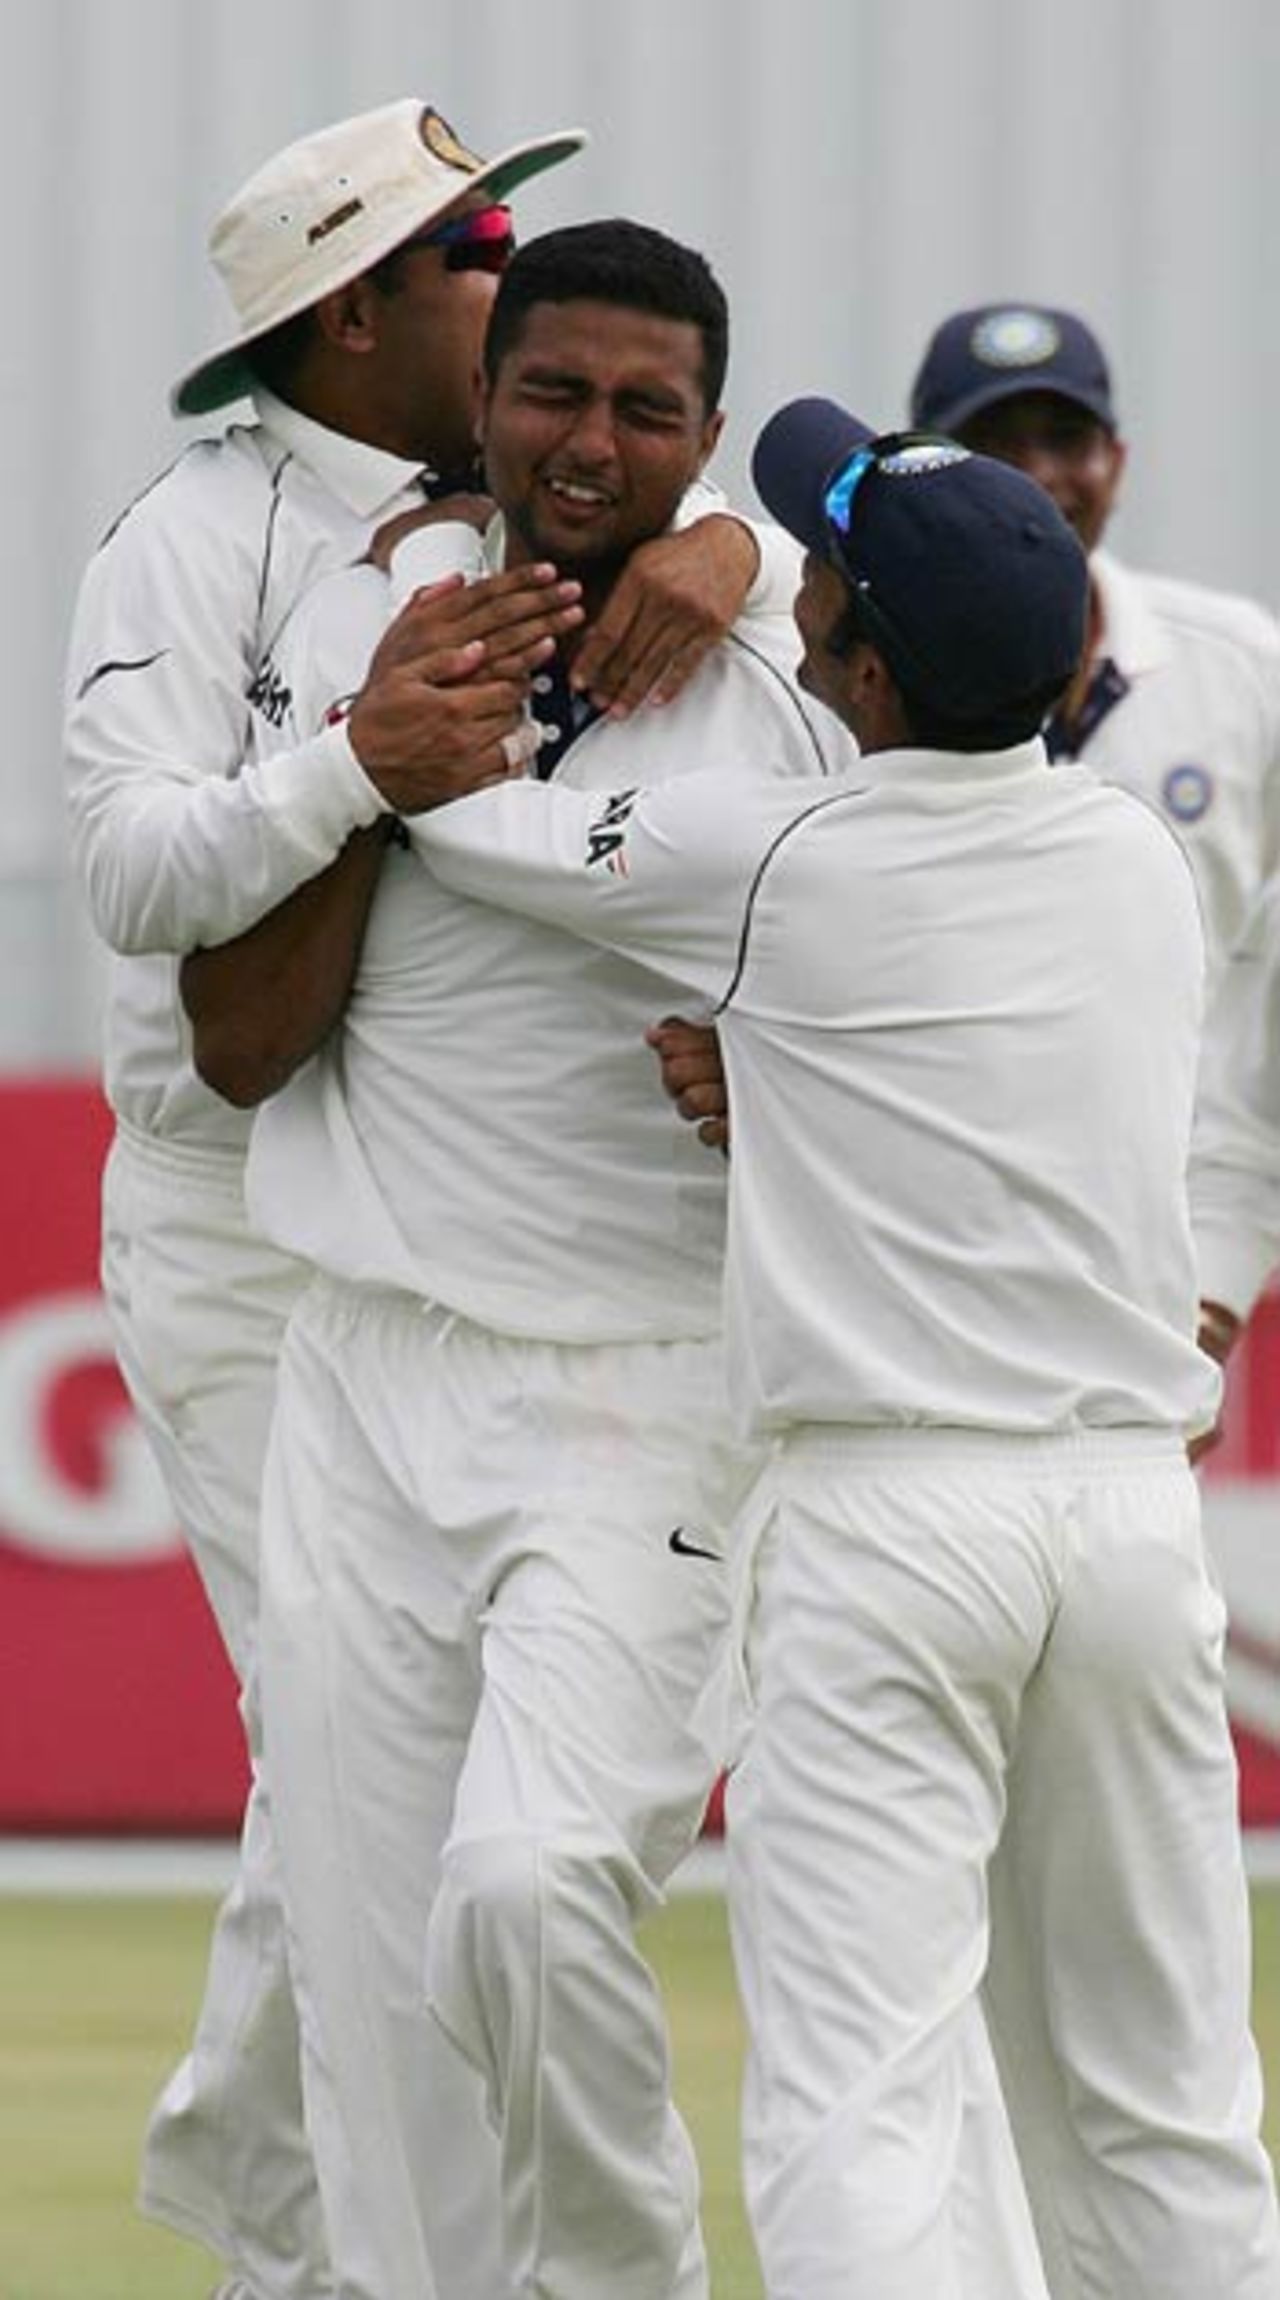 VRV Singh is the toast of the team after he picks up a wicket, Indians v Rest of South Africa, Tour Match, Potchefstroom, December 9, 2006